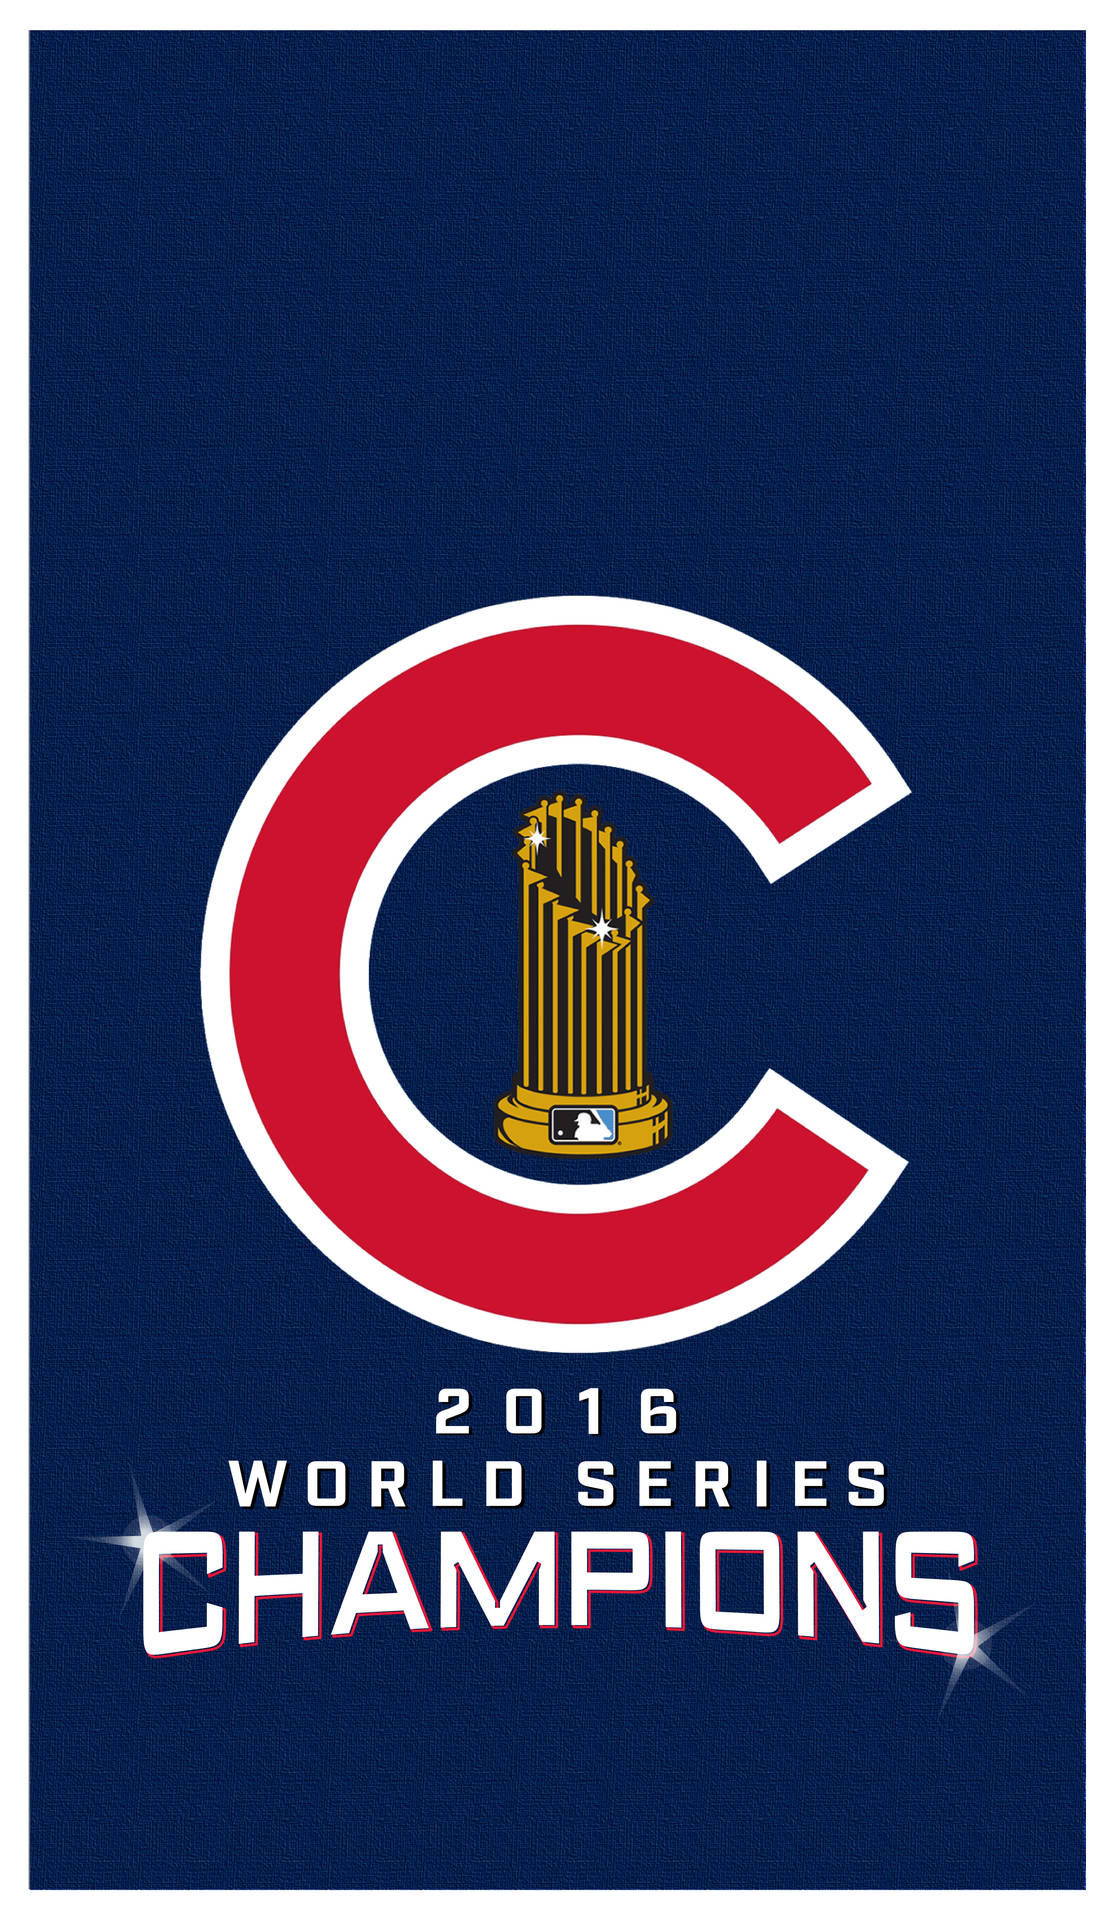 Chicago Cubs 2016 World Champions Wallpaper